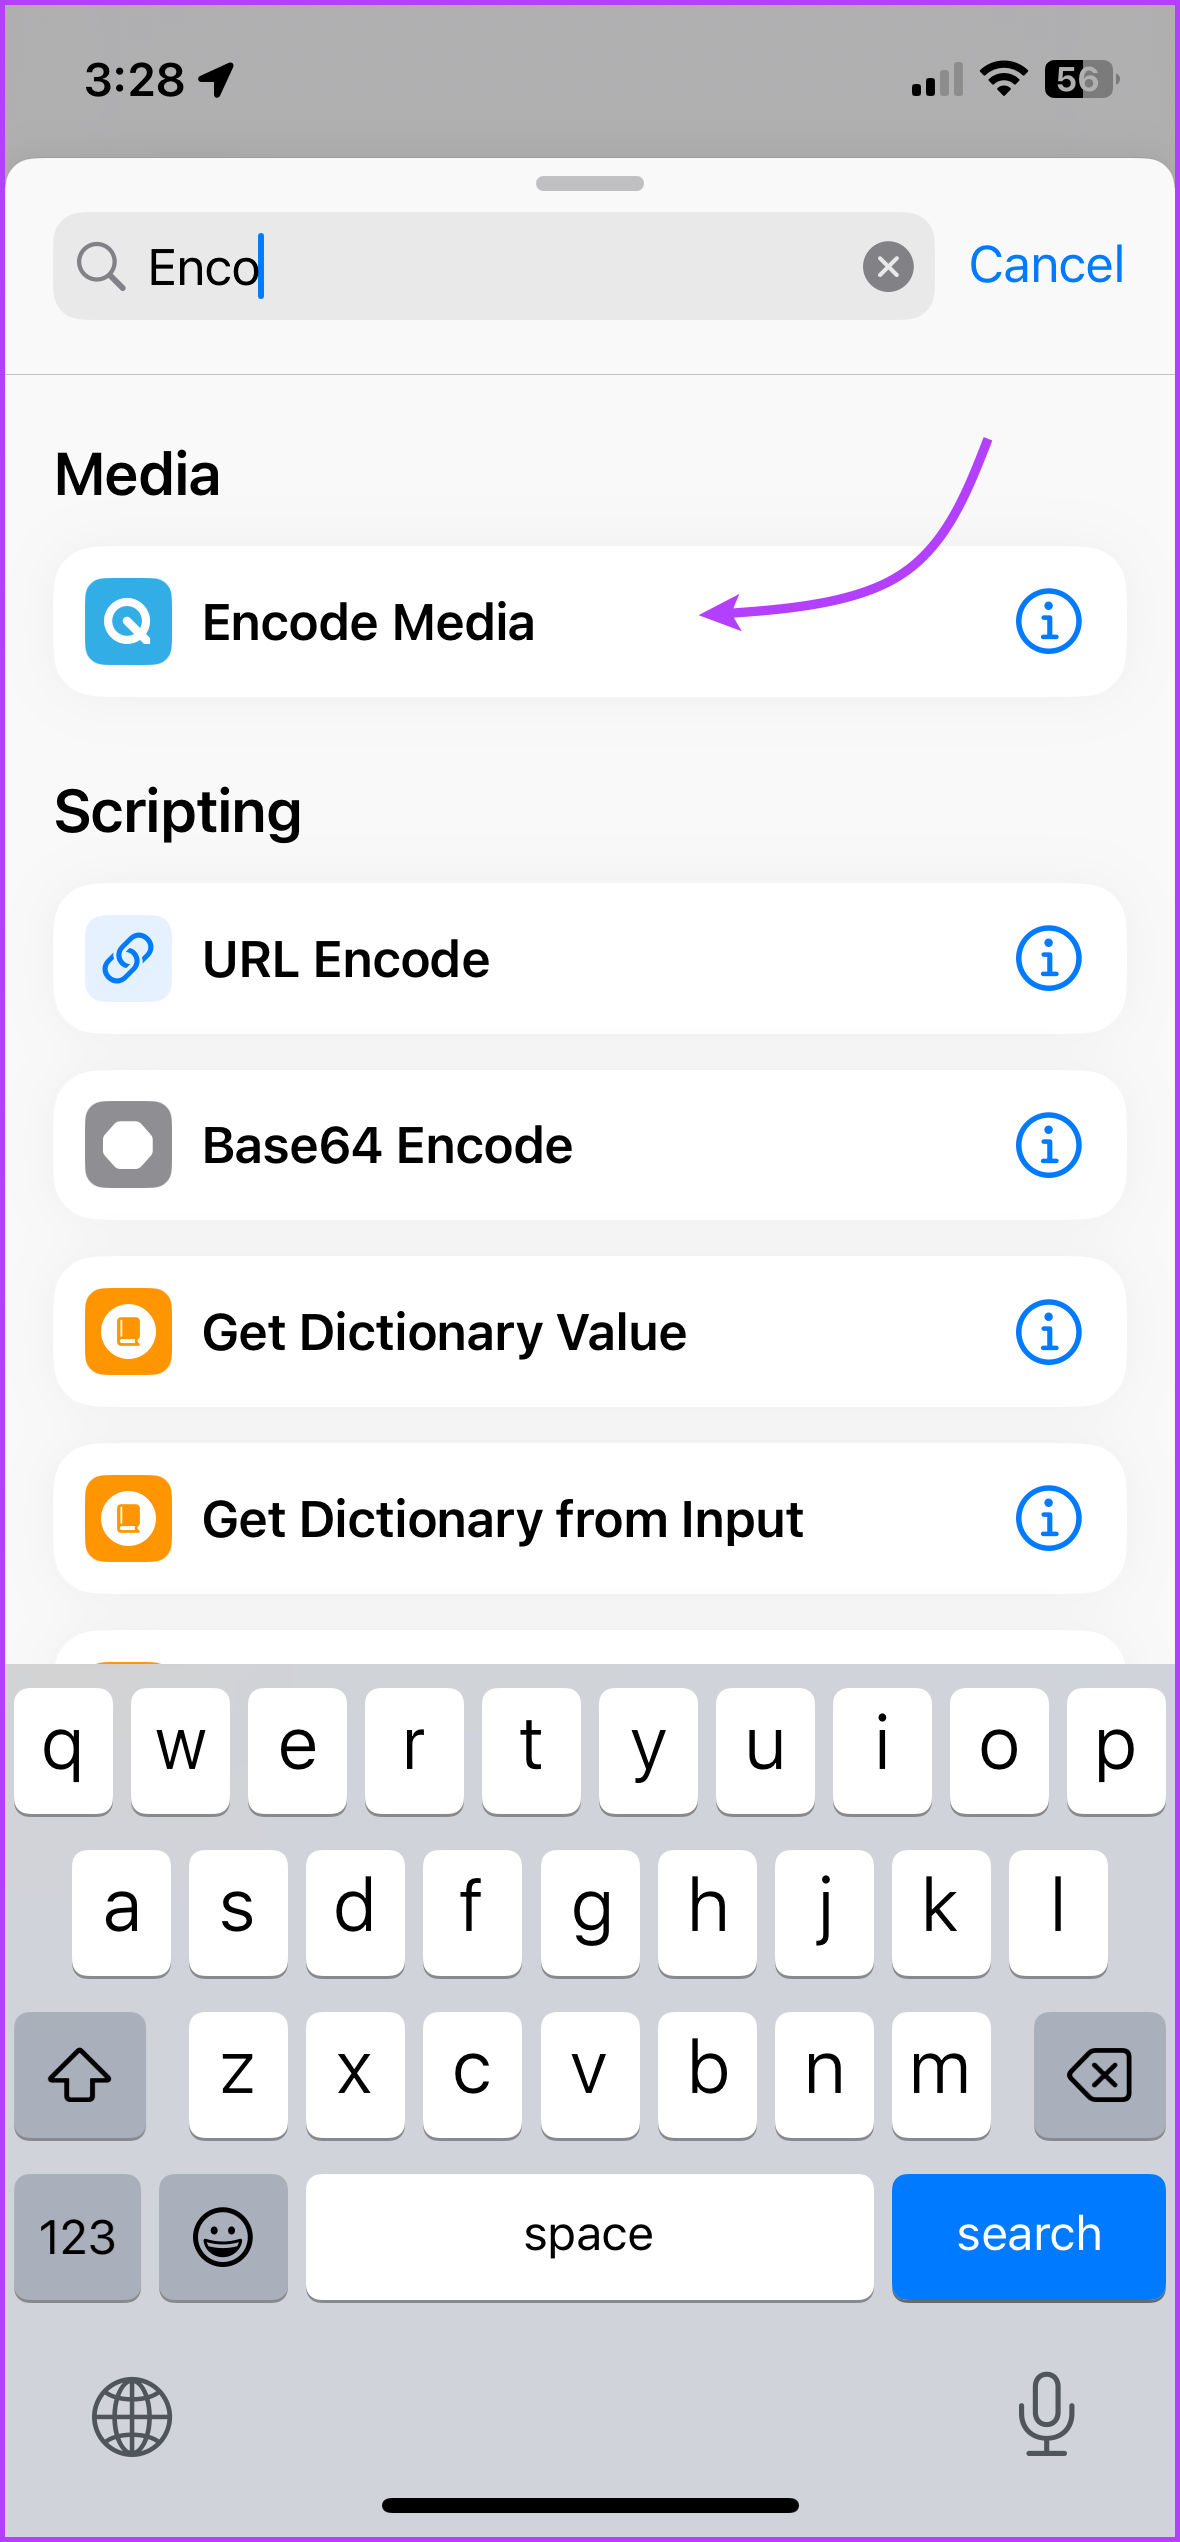 Search and select Encode Media 